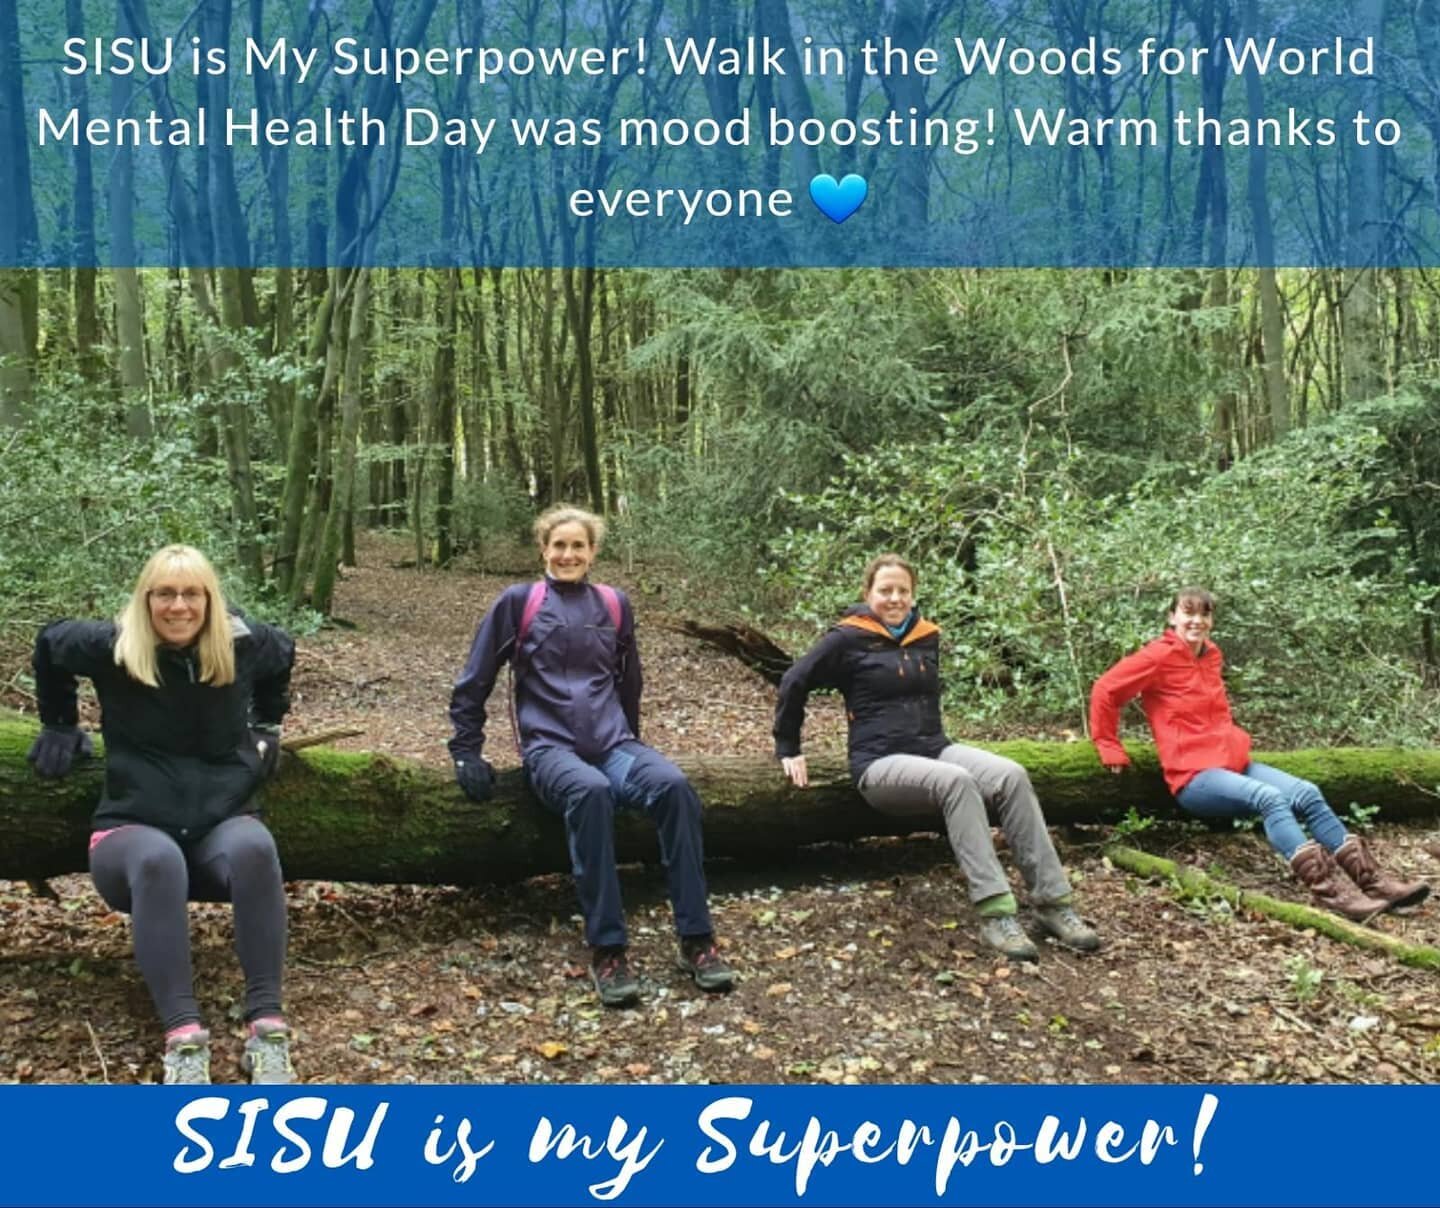 Happy World Mental Health Day everyone!

#worldmentalhealthday 
#SisuisMySuperpower 

&quot;SISU Is My Superpower!&quot; is a gobal group of like-minded busy people who wish to live, learn and share Nordic style healthy living. Together, we unleash o